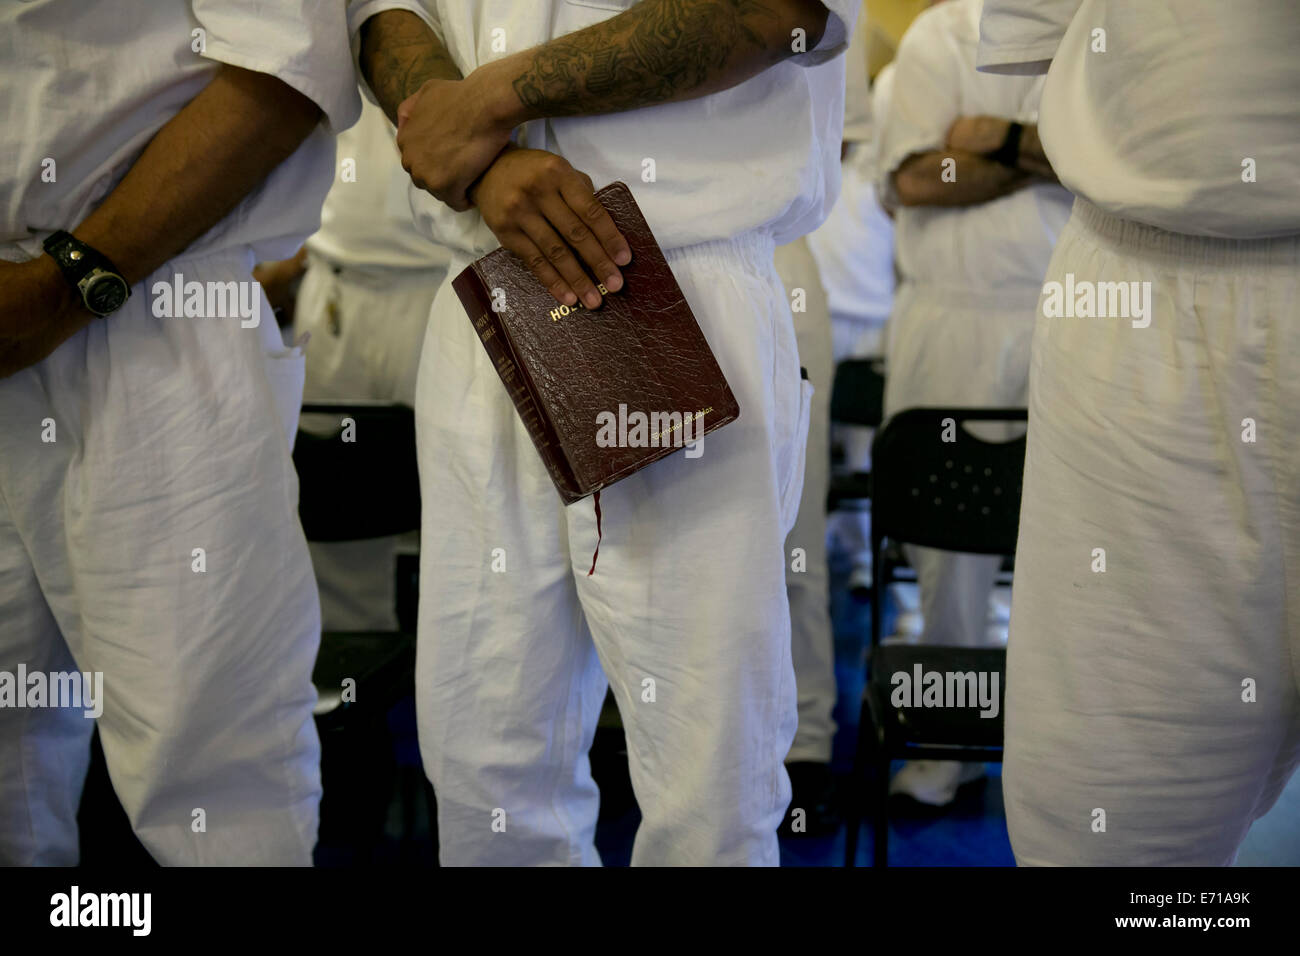 Male inmate students who are enrolled in the Southwestern Baptist Theological Seminary program at Darrington prison near Houston Stock Photo